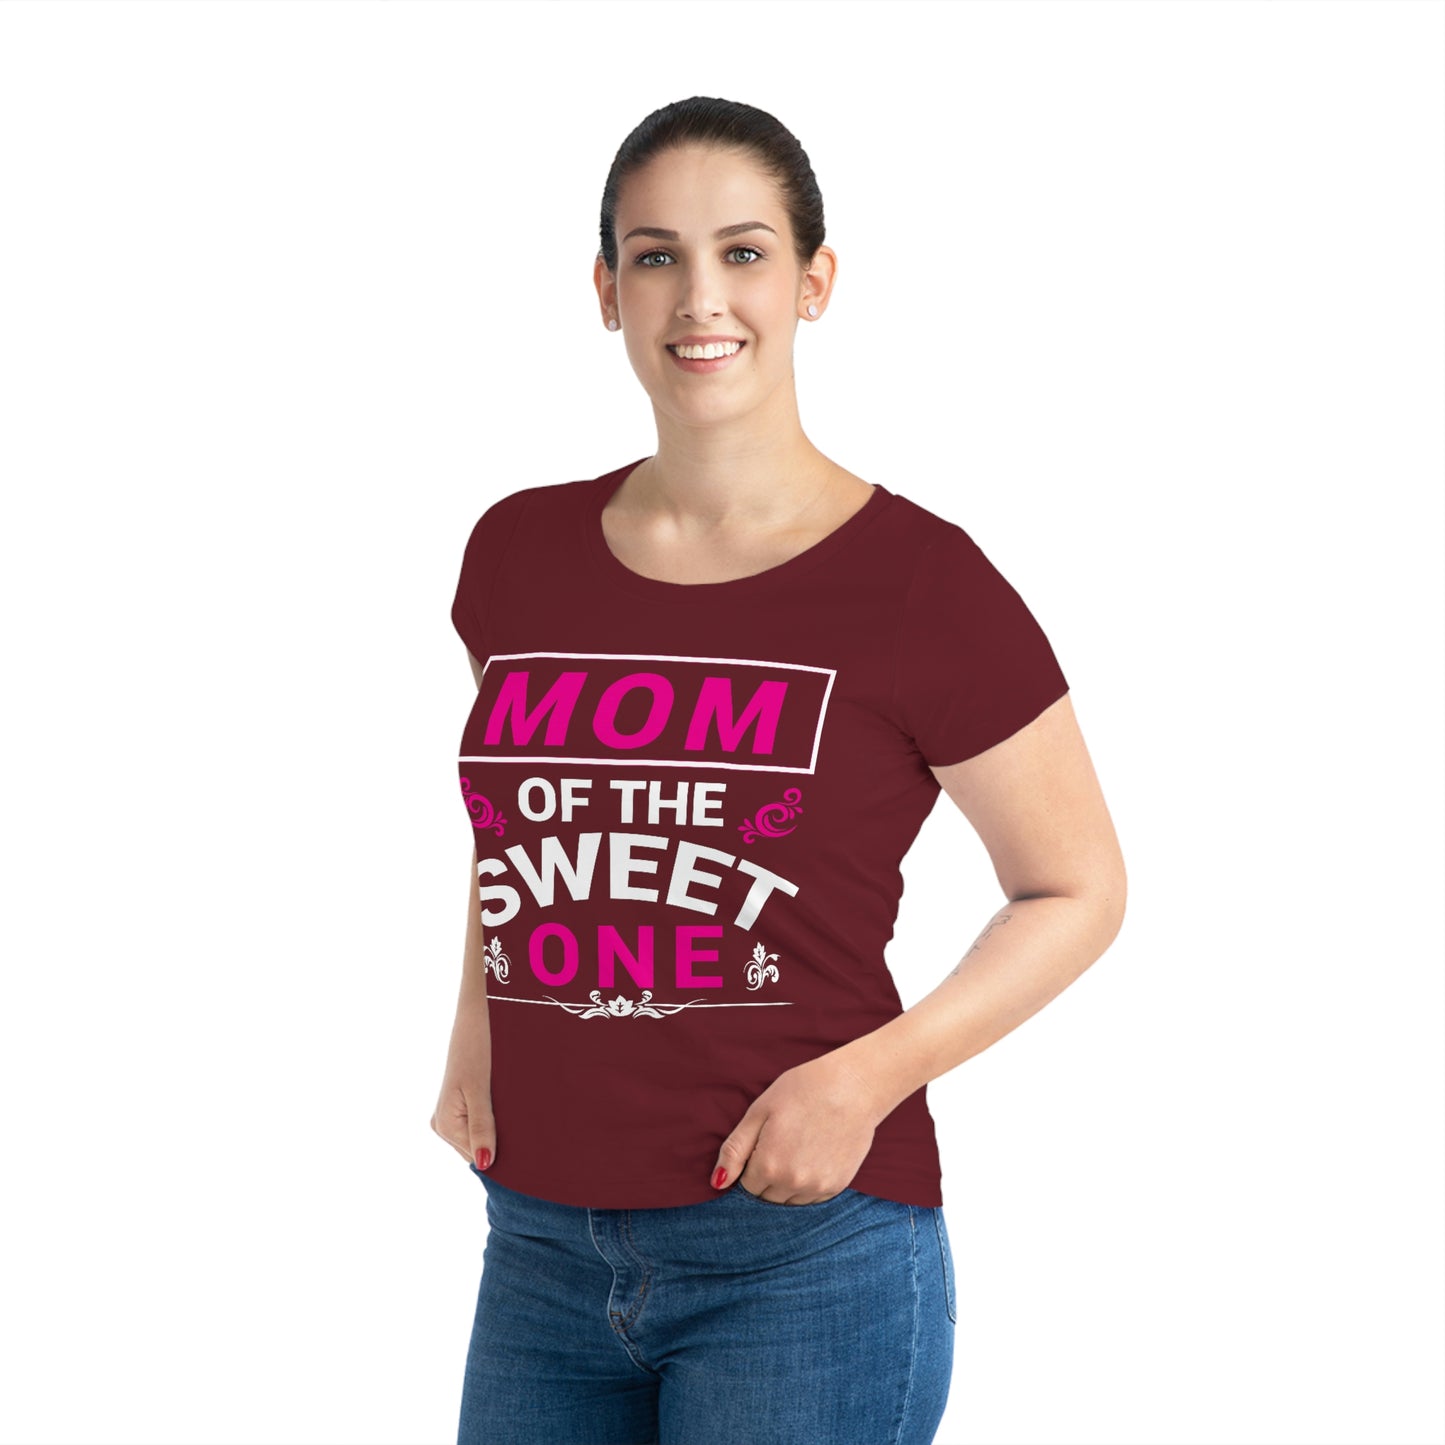 Mom of the Sweet One